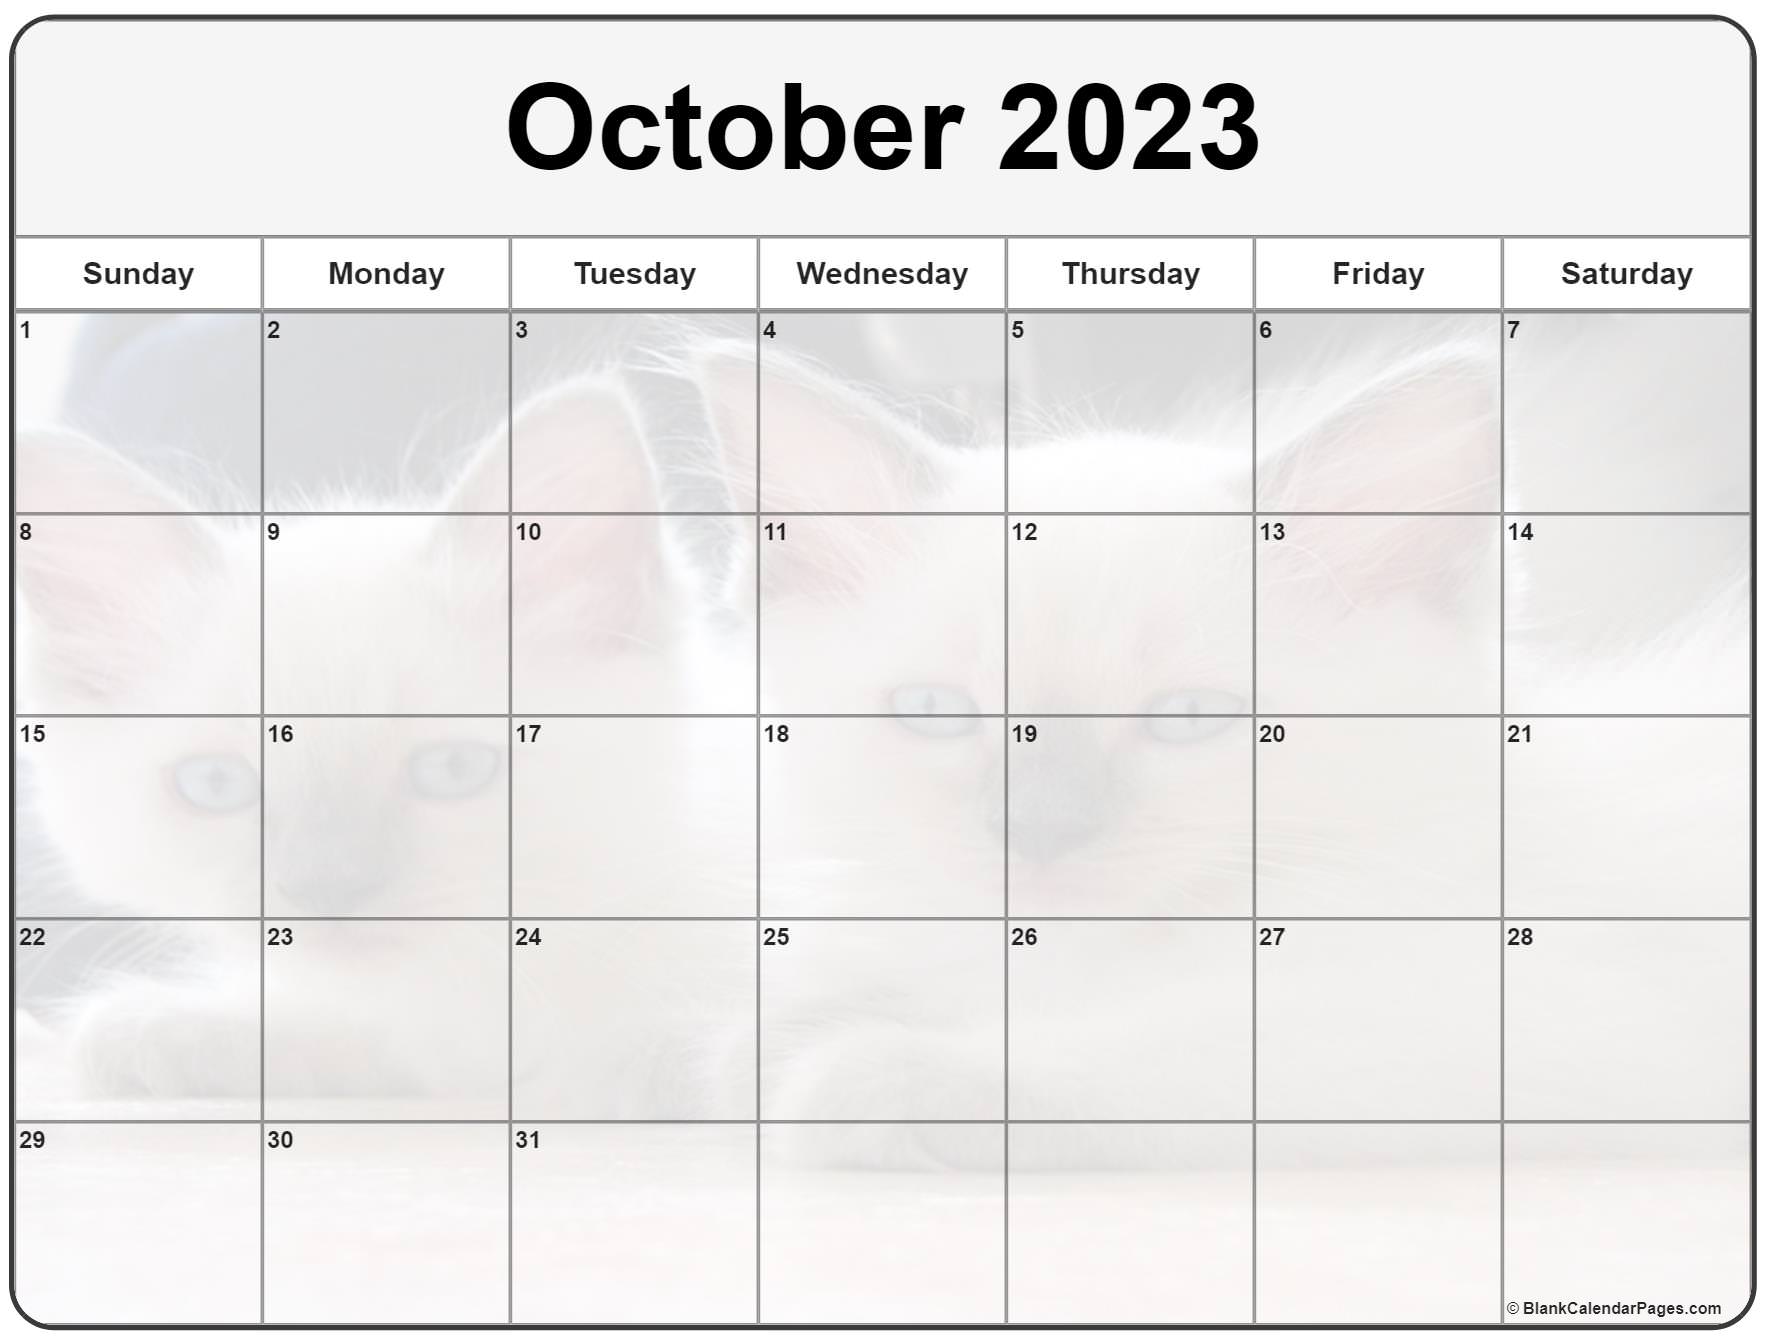 Collection of October 2023 photo calendars with image filters.